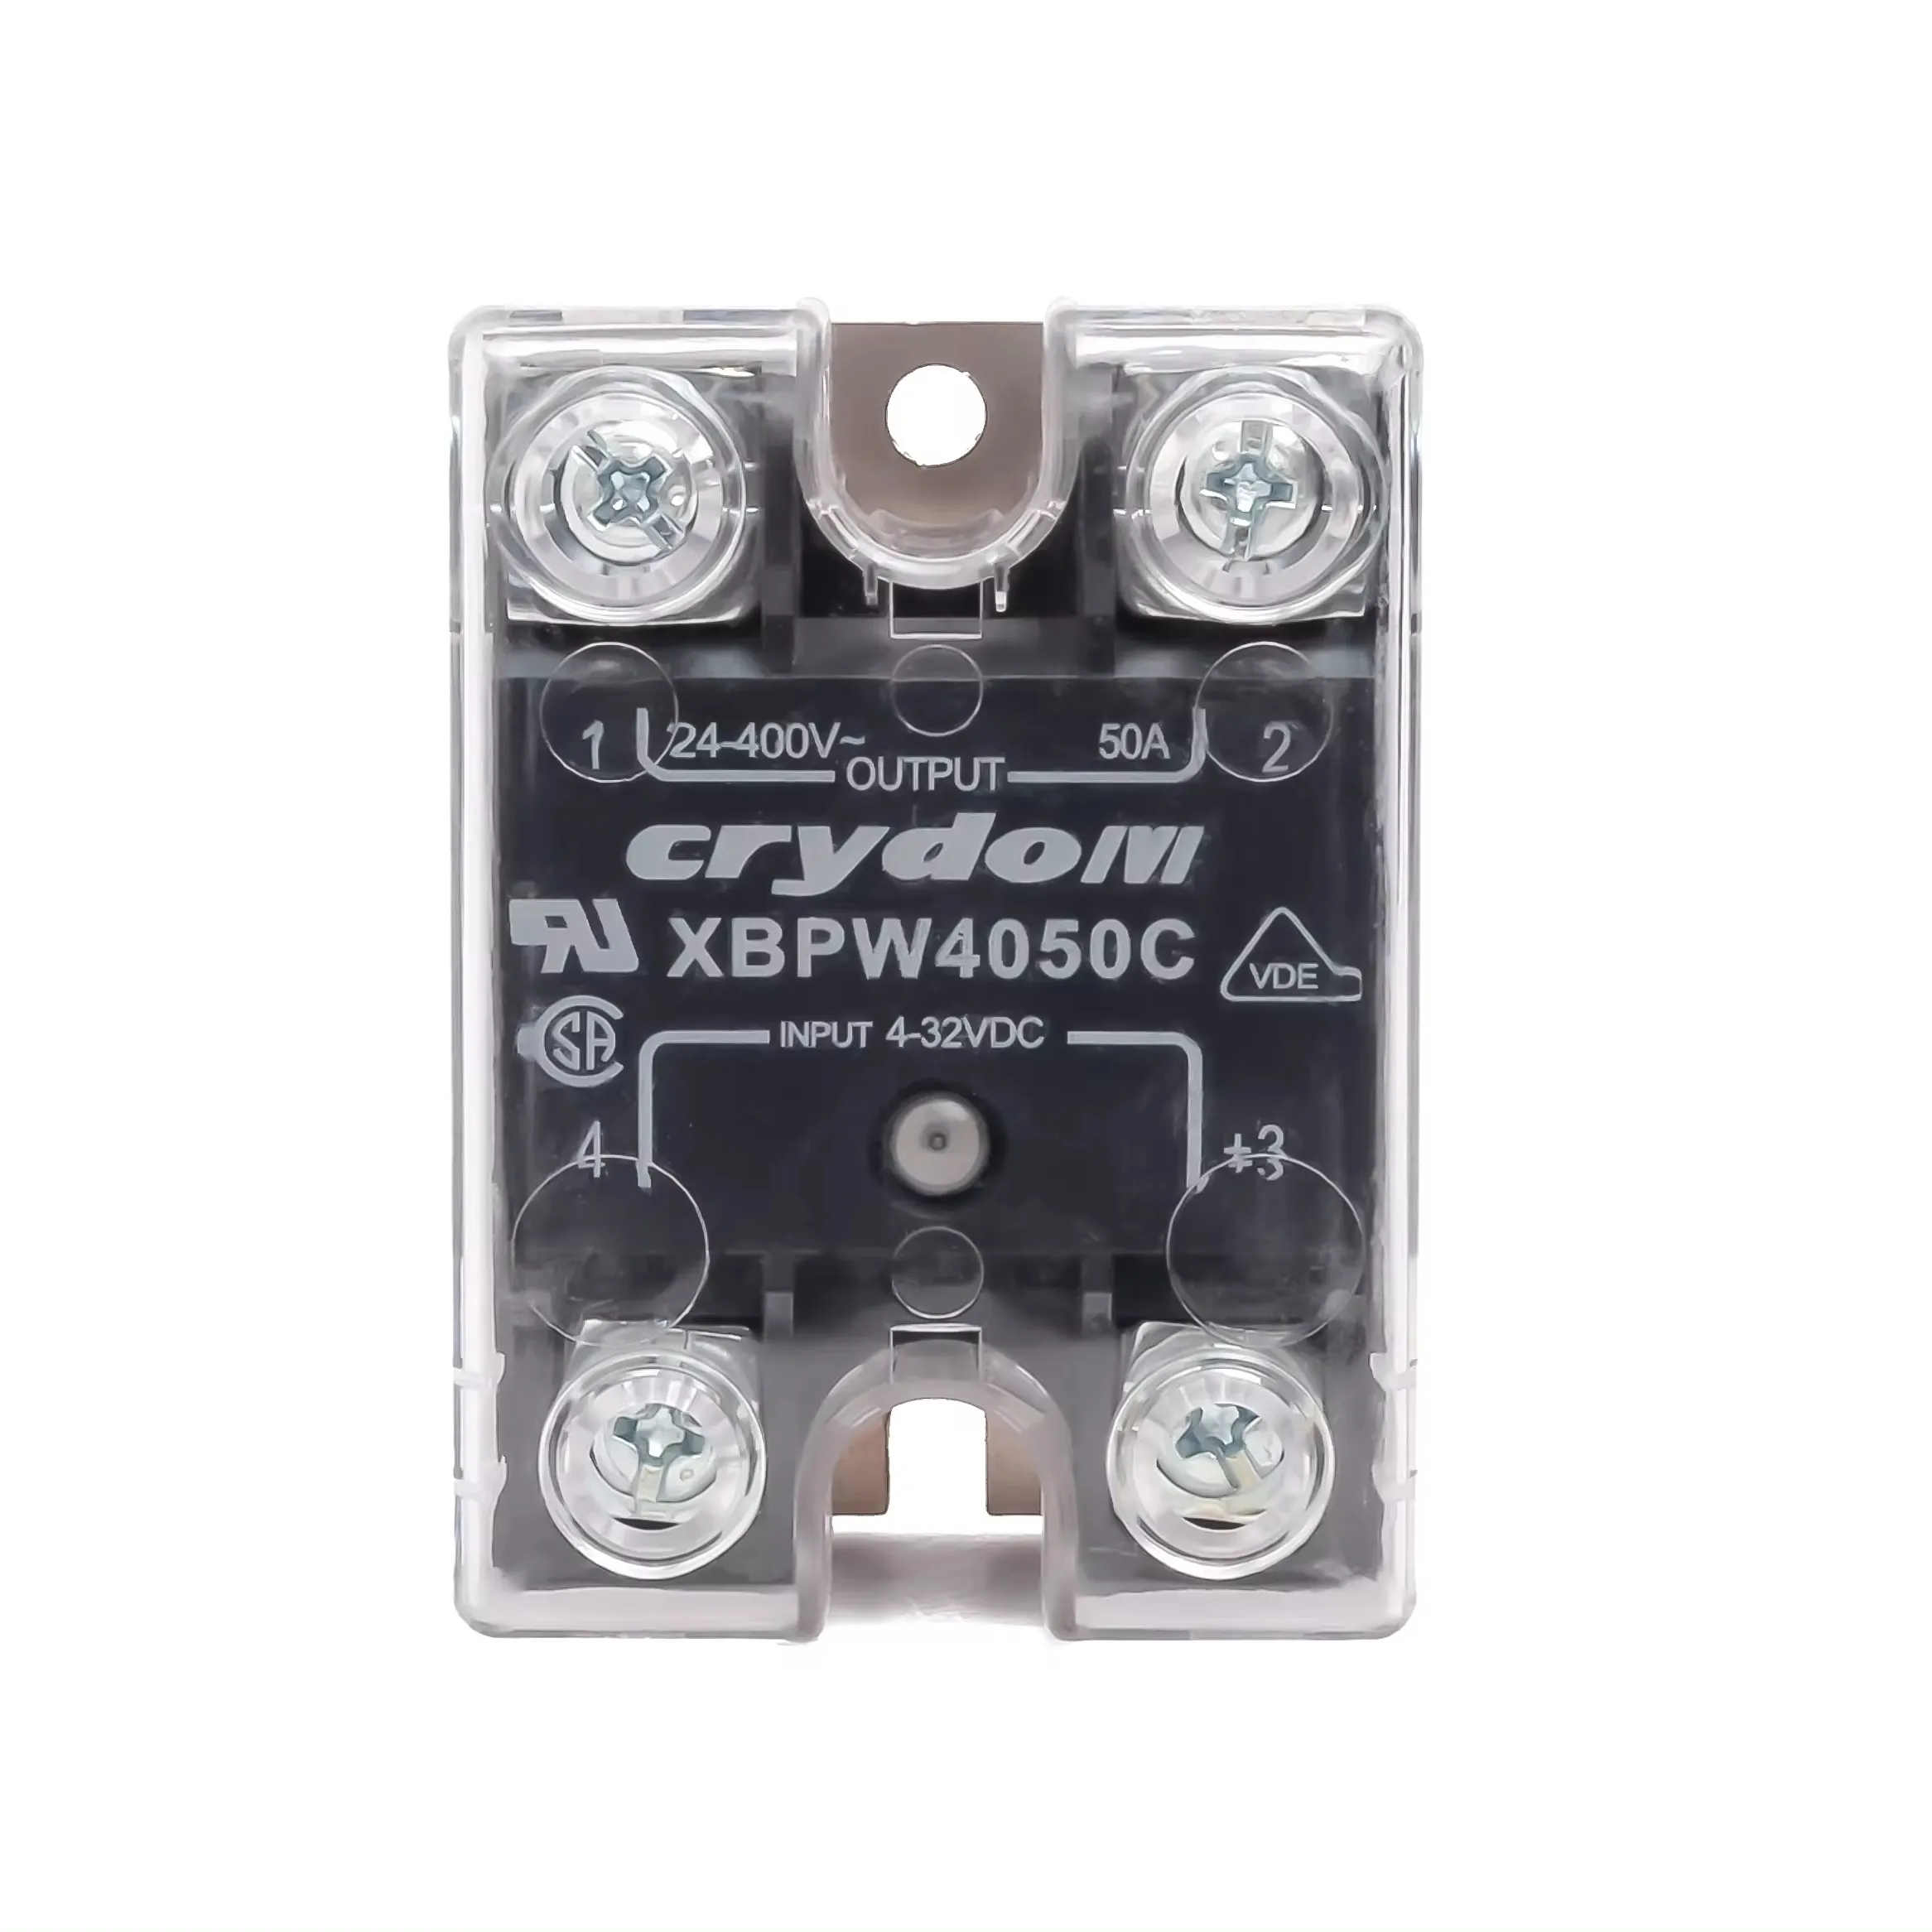 Solid State Relay DC to AC 25A Single Phase Semi-Conductor Relay Module Control 4-32V DC Load 5-200V DC